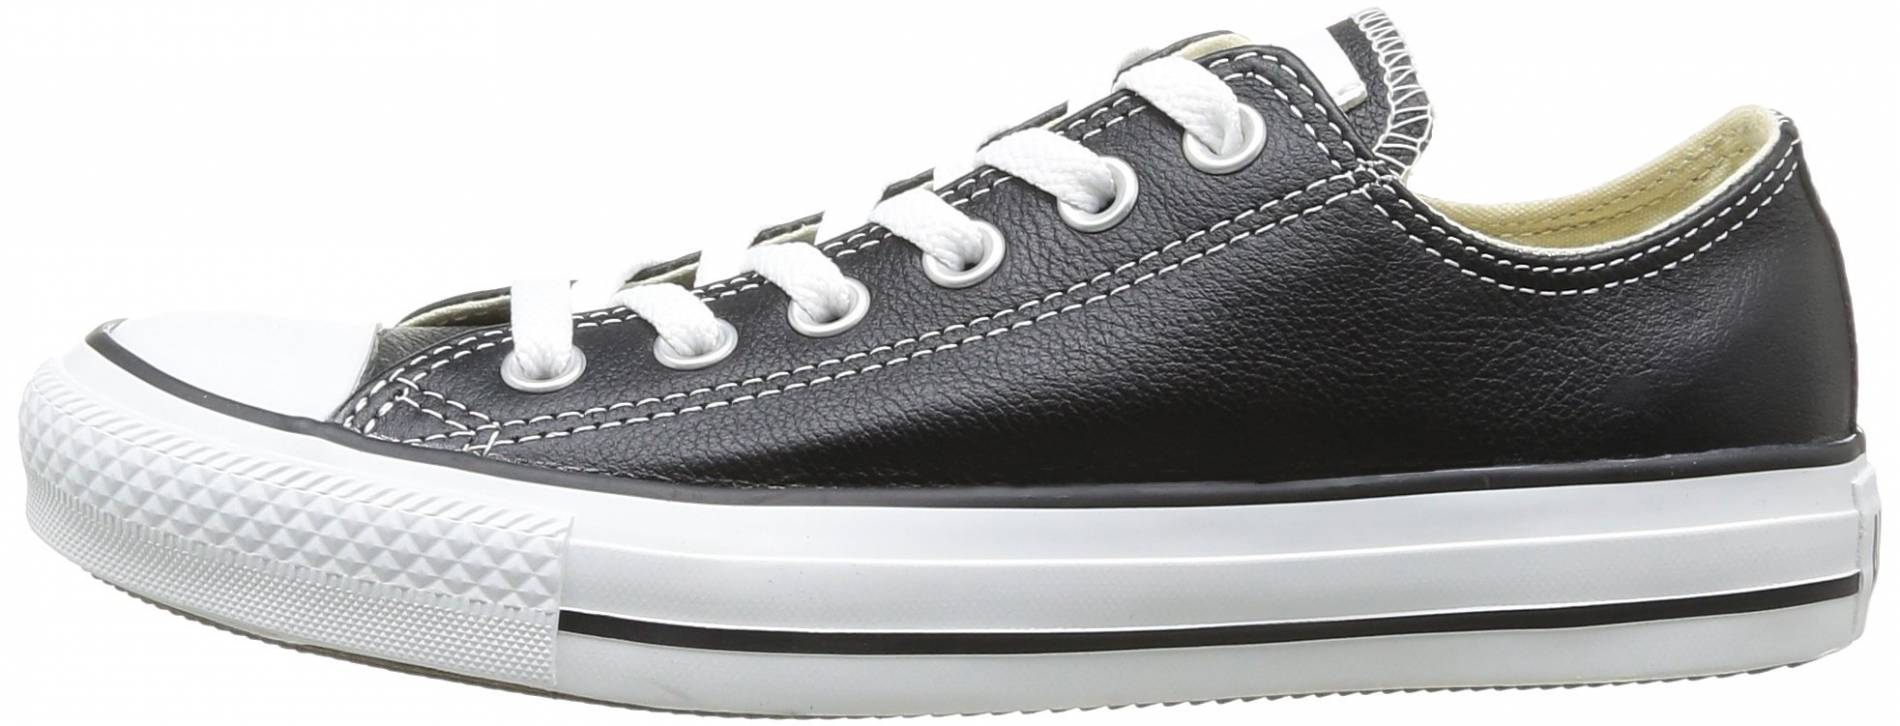 sneakers chuck taylor all star ox